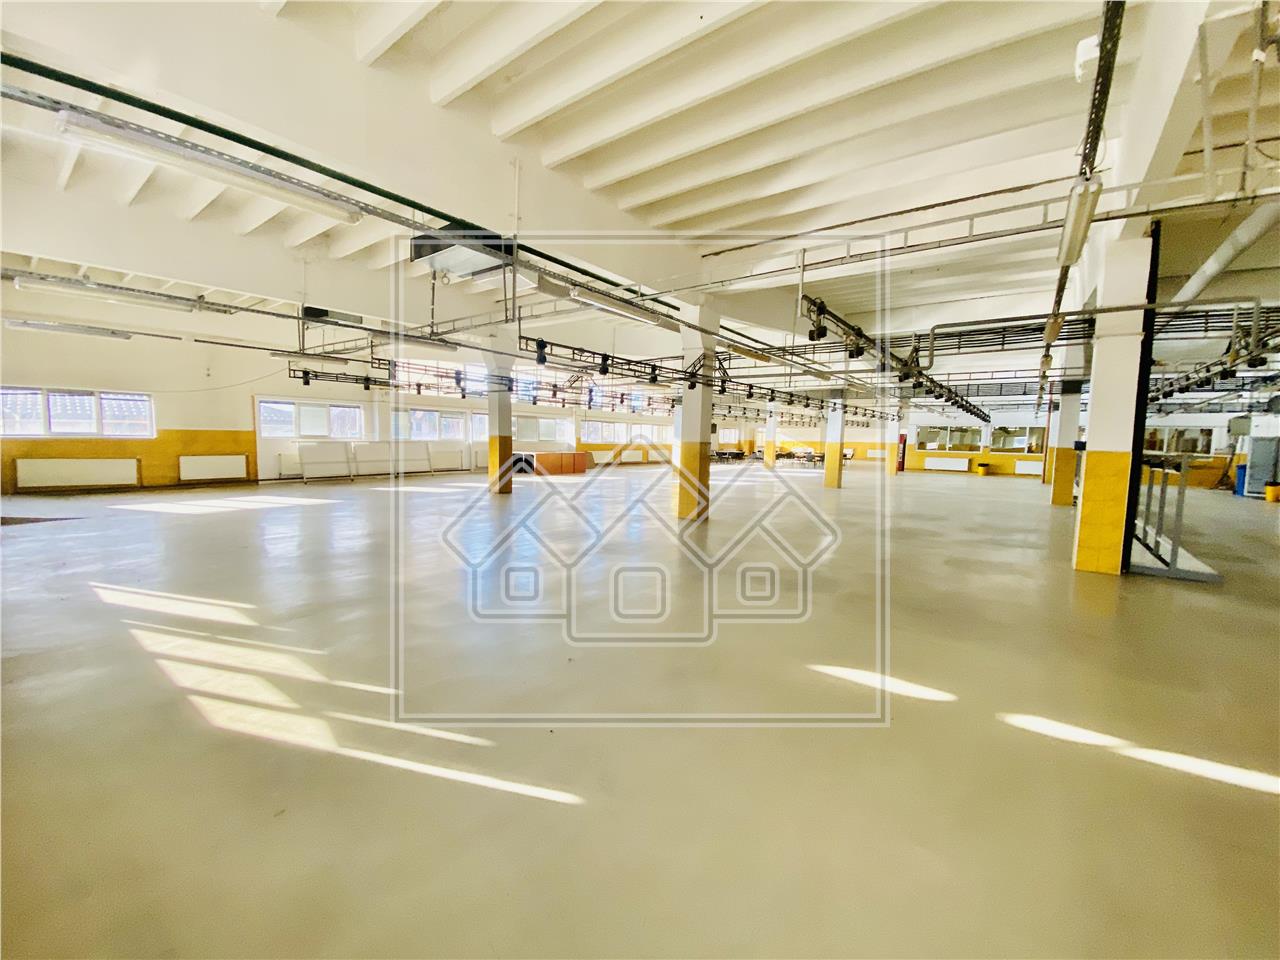 Industrial space for rent in Sibiu - Central area - modern finishes